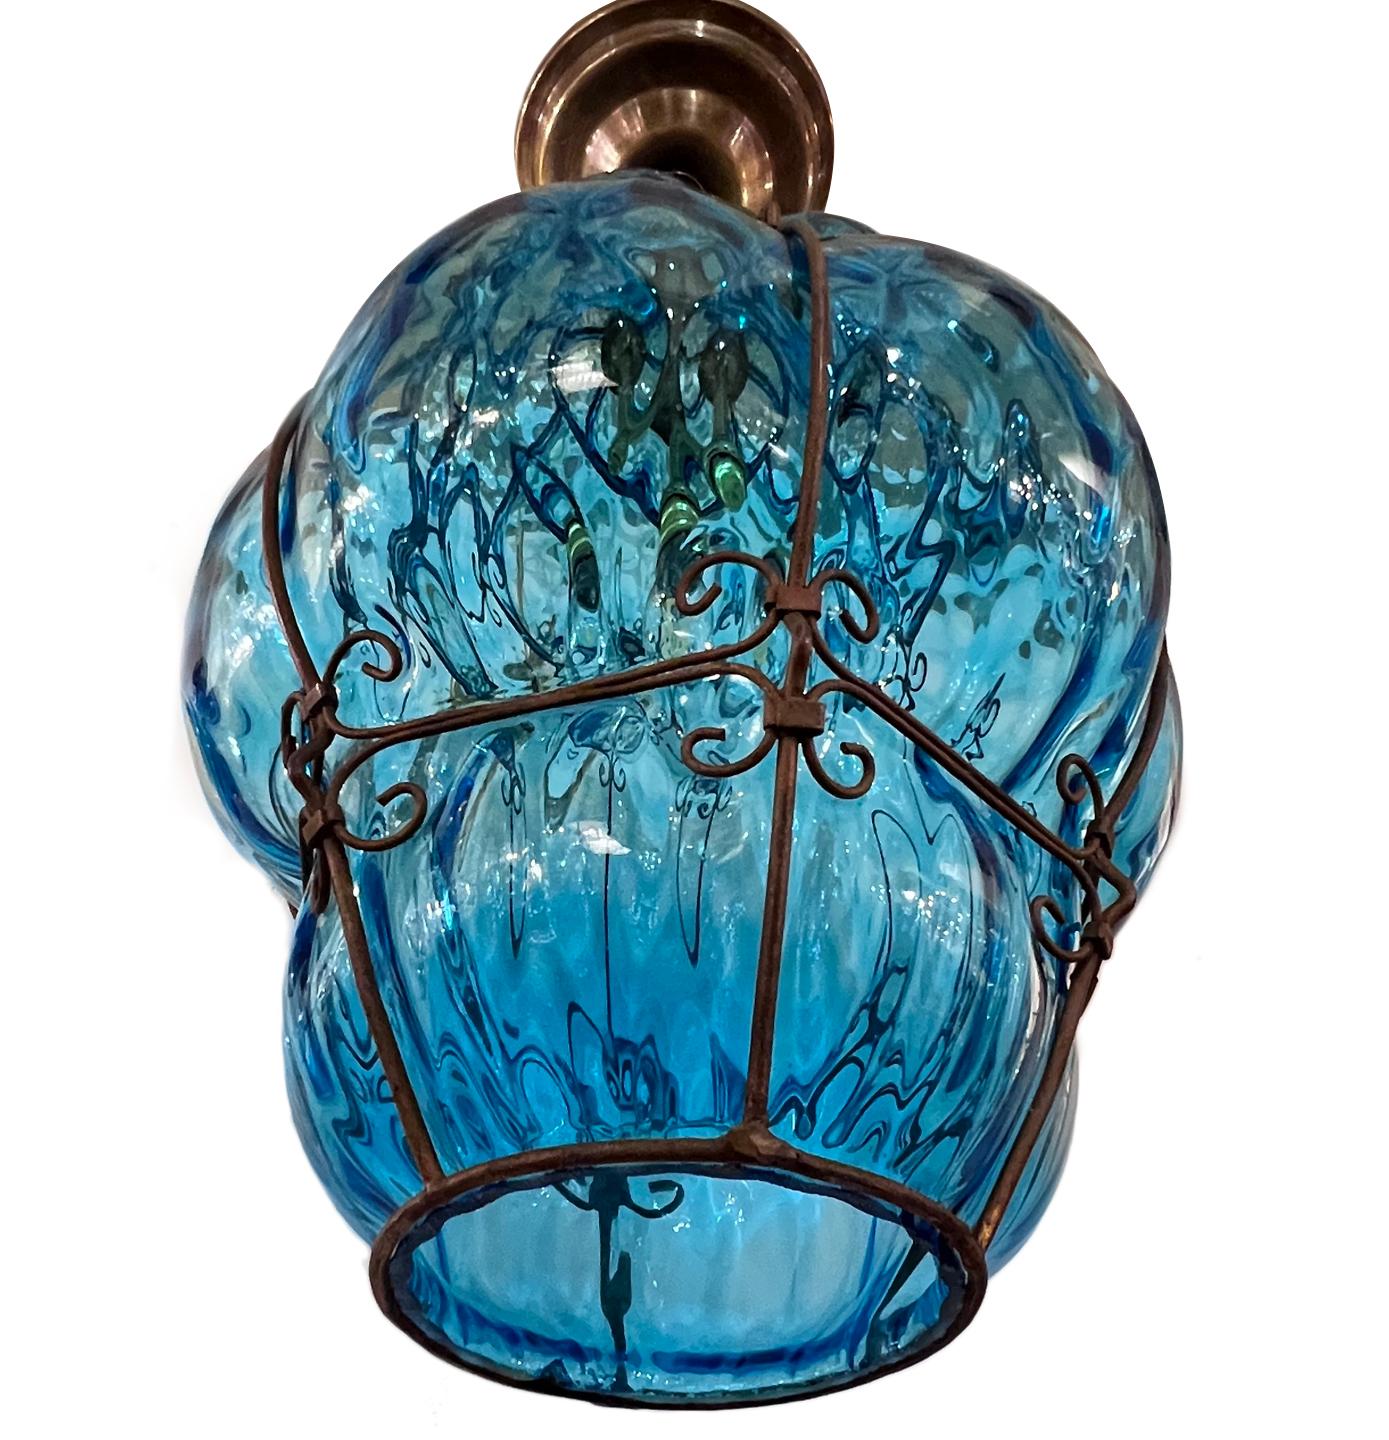 A circa 1930’s blown turquoise colored Murano glass lantern with iron-work frame and one Edison interior light.

Measurements:
Height of body:16